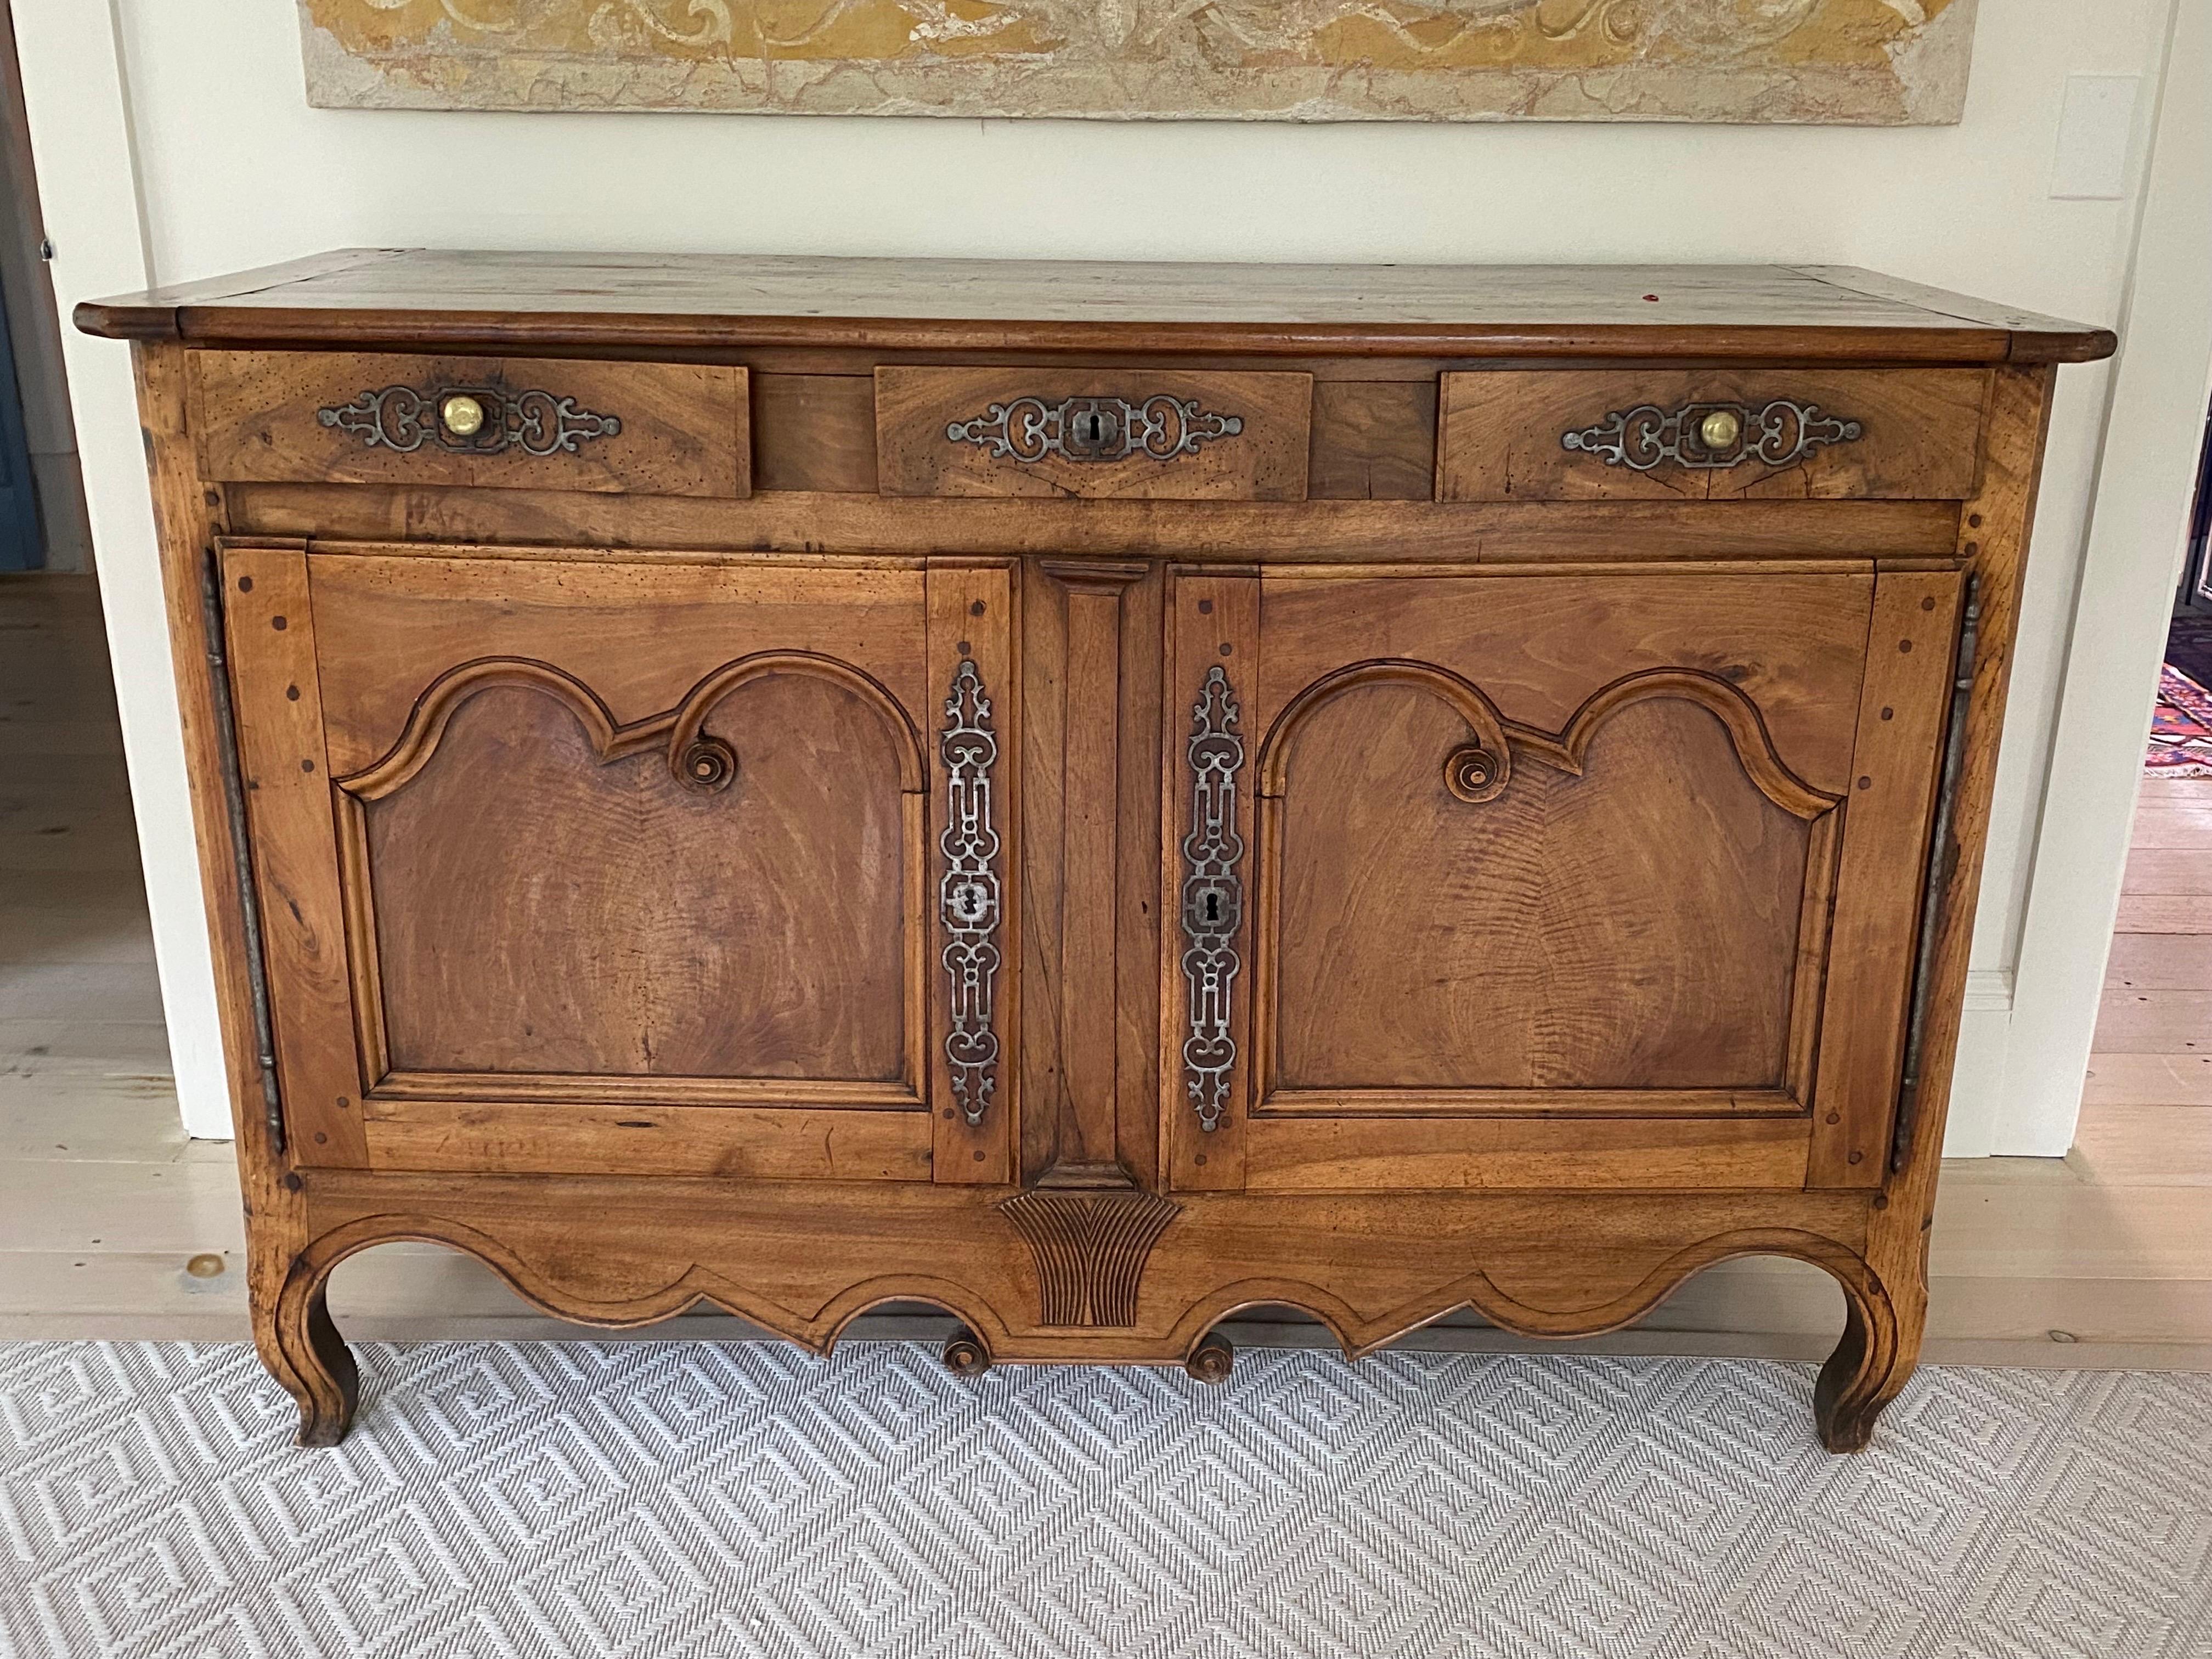 18th century French walnut Louis XV Provincial Buffet
A period handcrafted buffet made of solid walnut with three drawers above two beveled doors opening to a single shelf open. Original interior and exterior hardware. Classic curved and scrolling